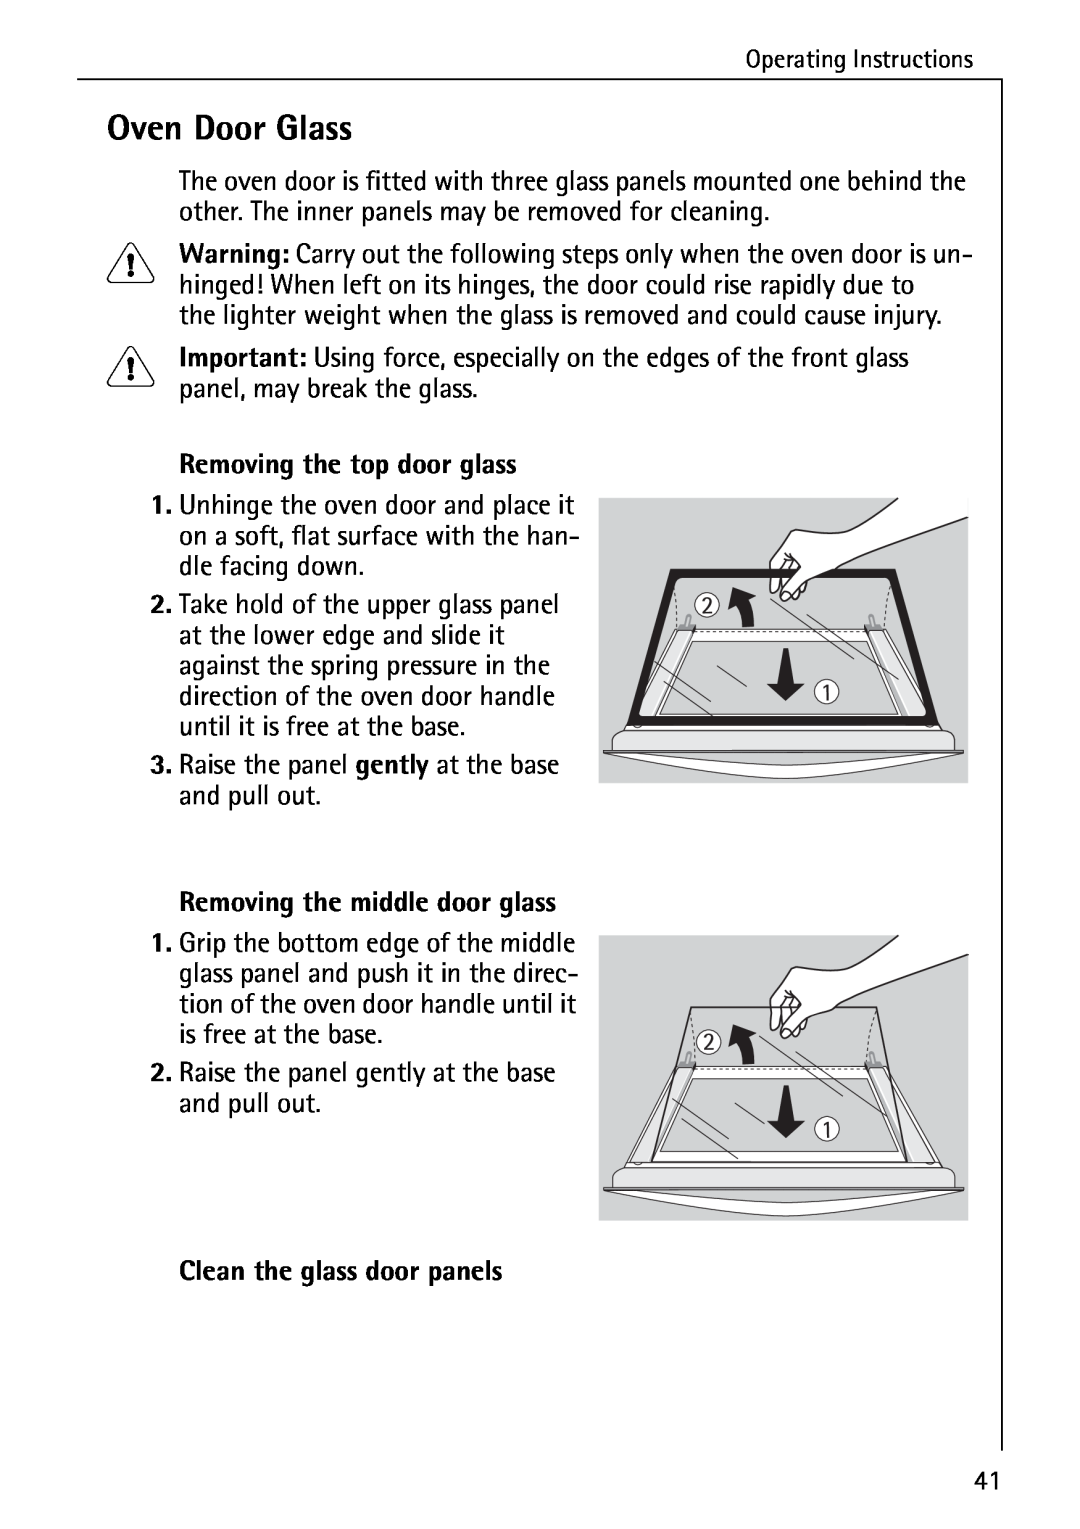 Electrolux B2190-1 manual Oven Door Glass, Removing the top door glass, Removing the middle door glass 